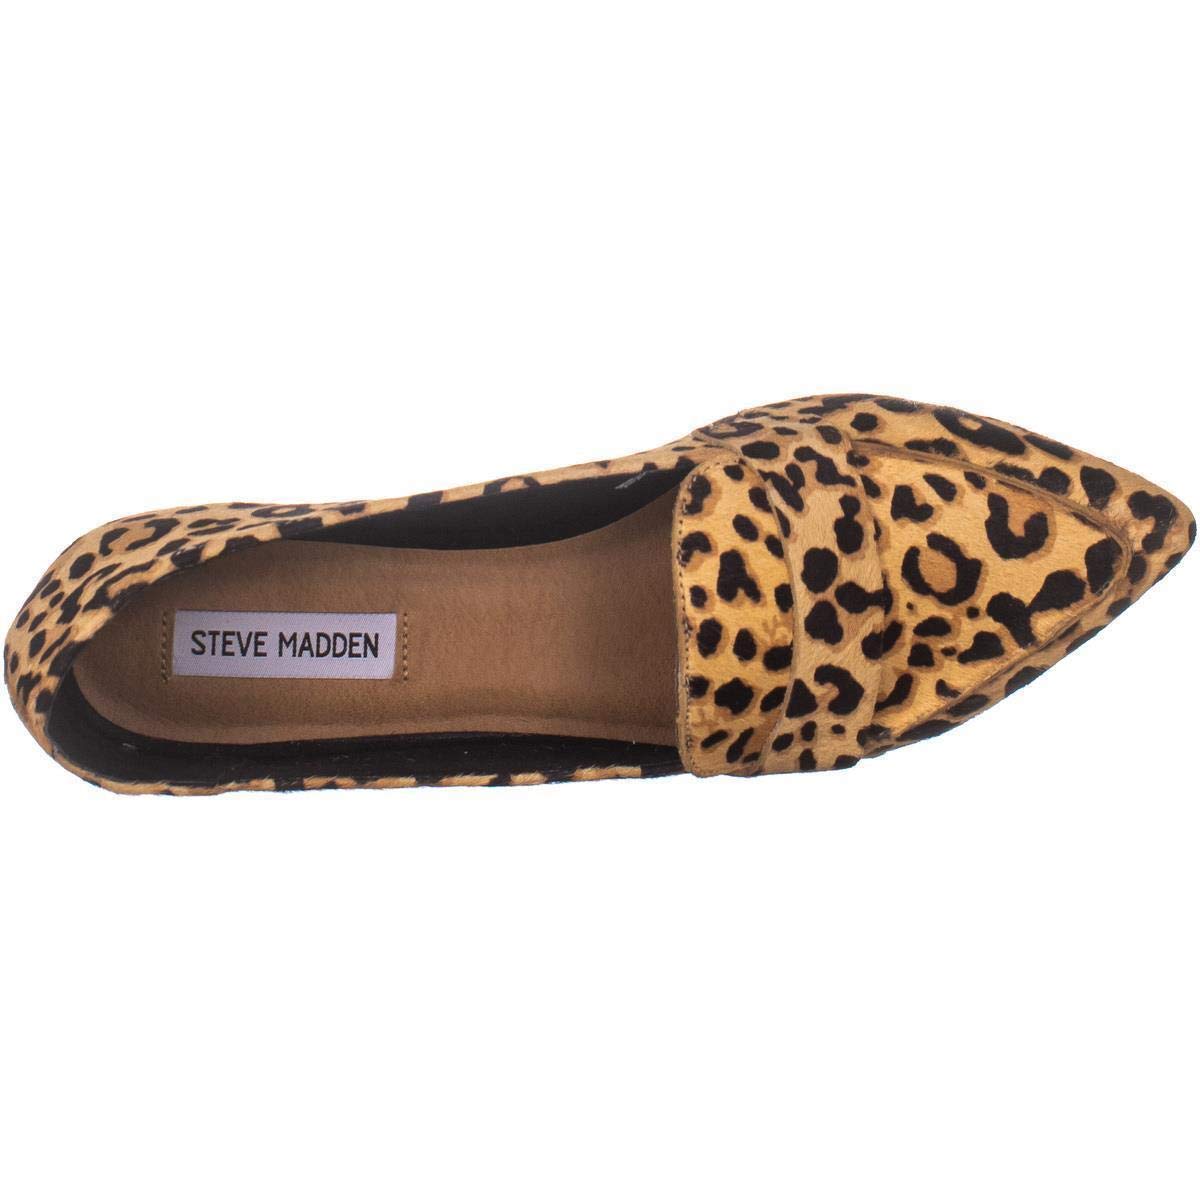 Steve Madden Women's Shoes Carver Suede Pointed Toe Loafers, Leopard, Size 8.0 H | eBay